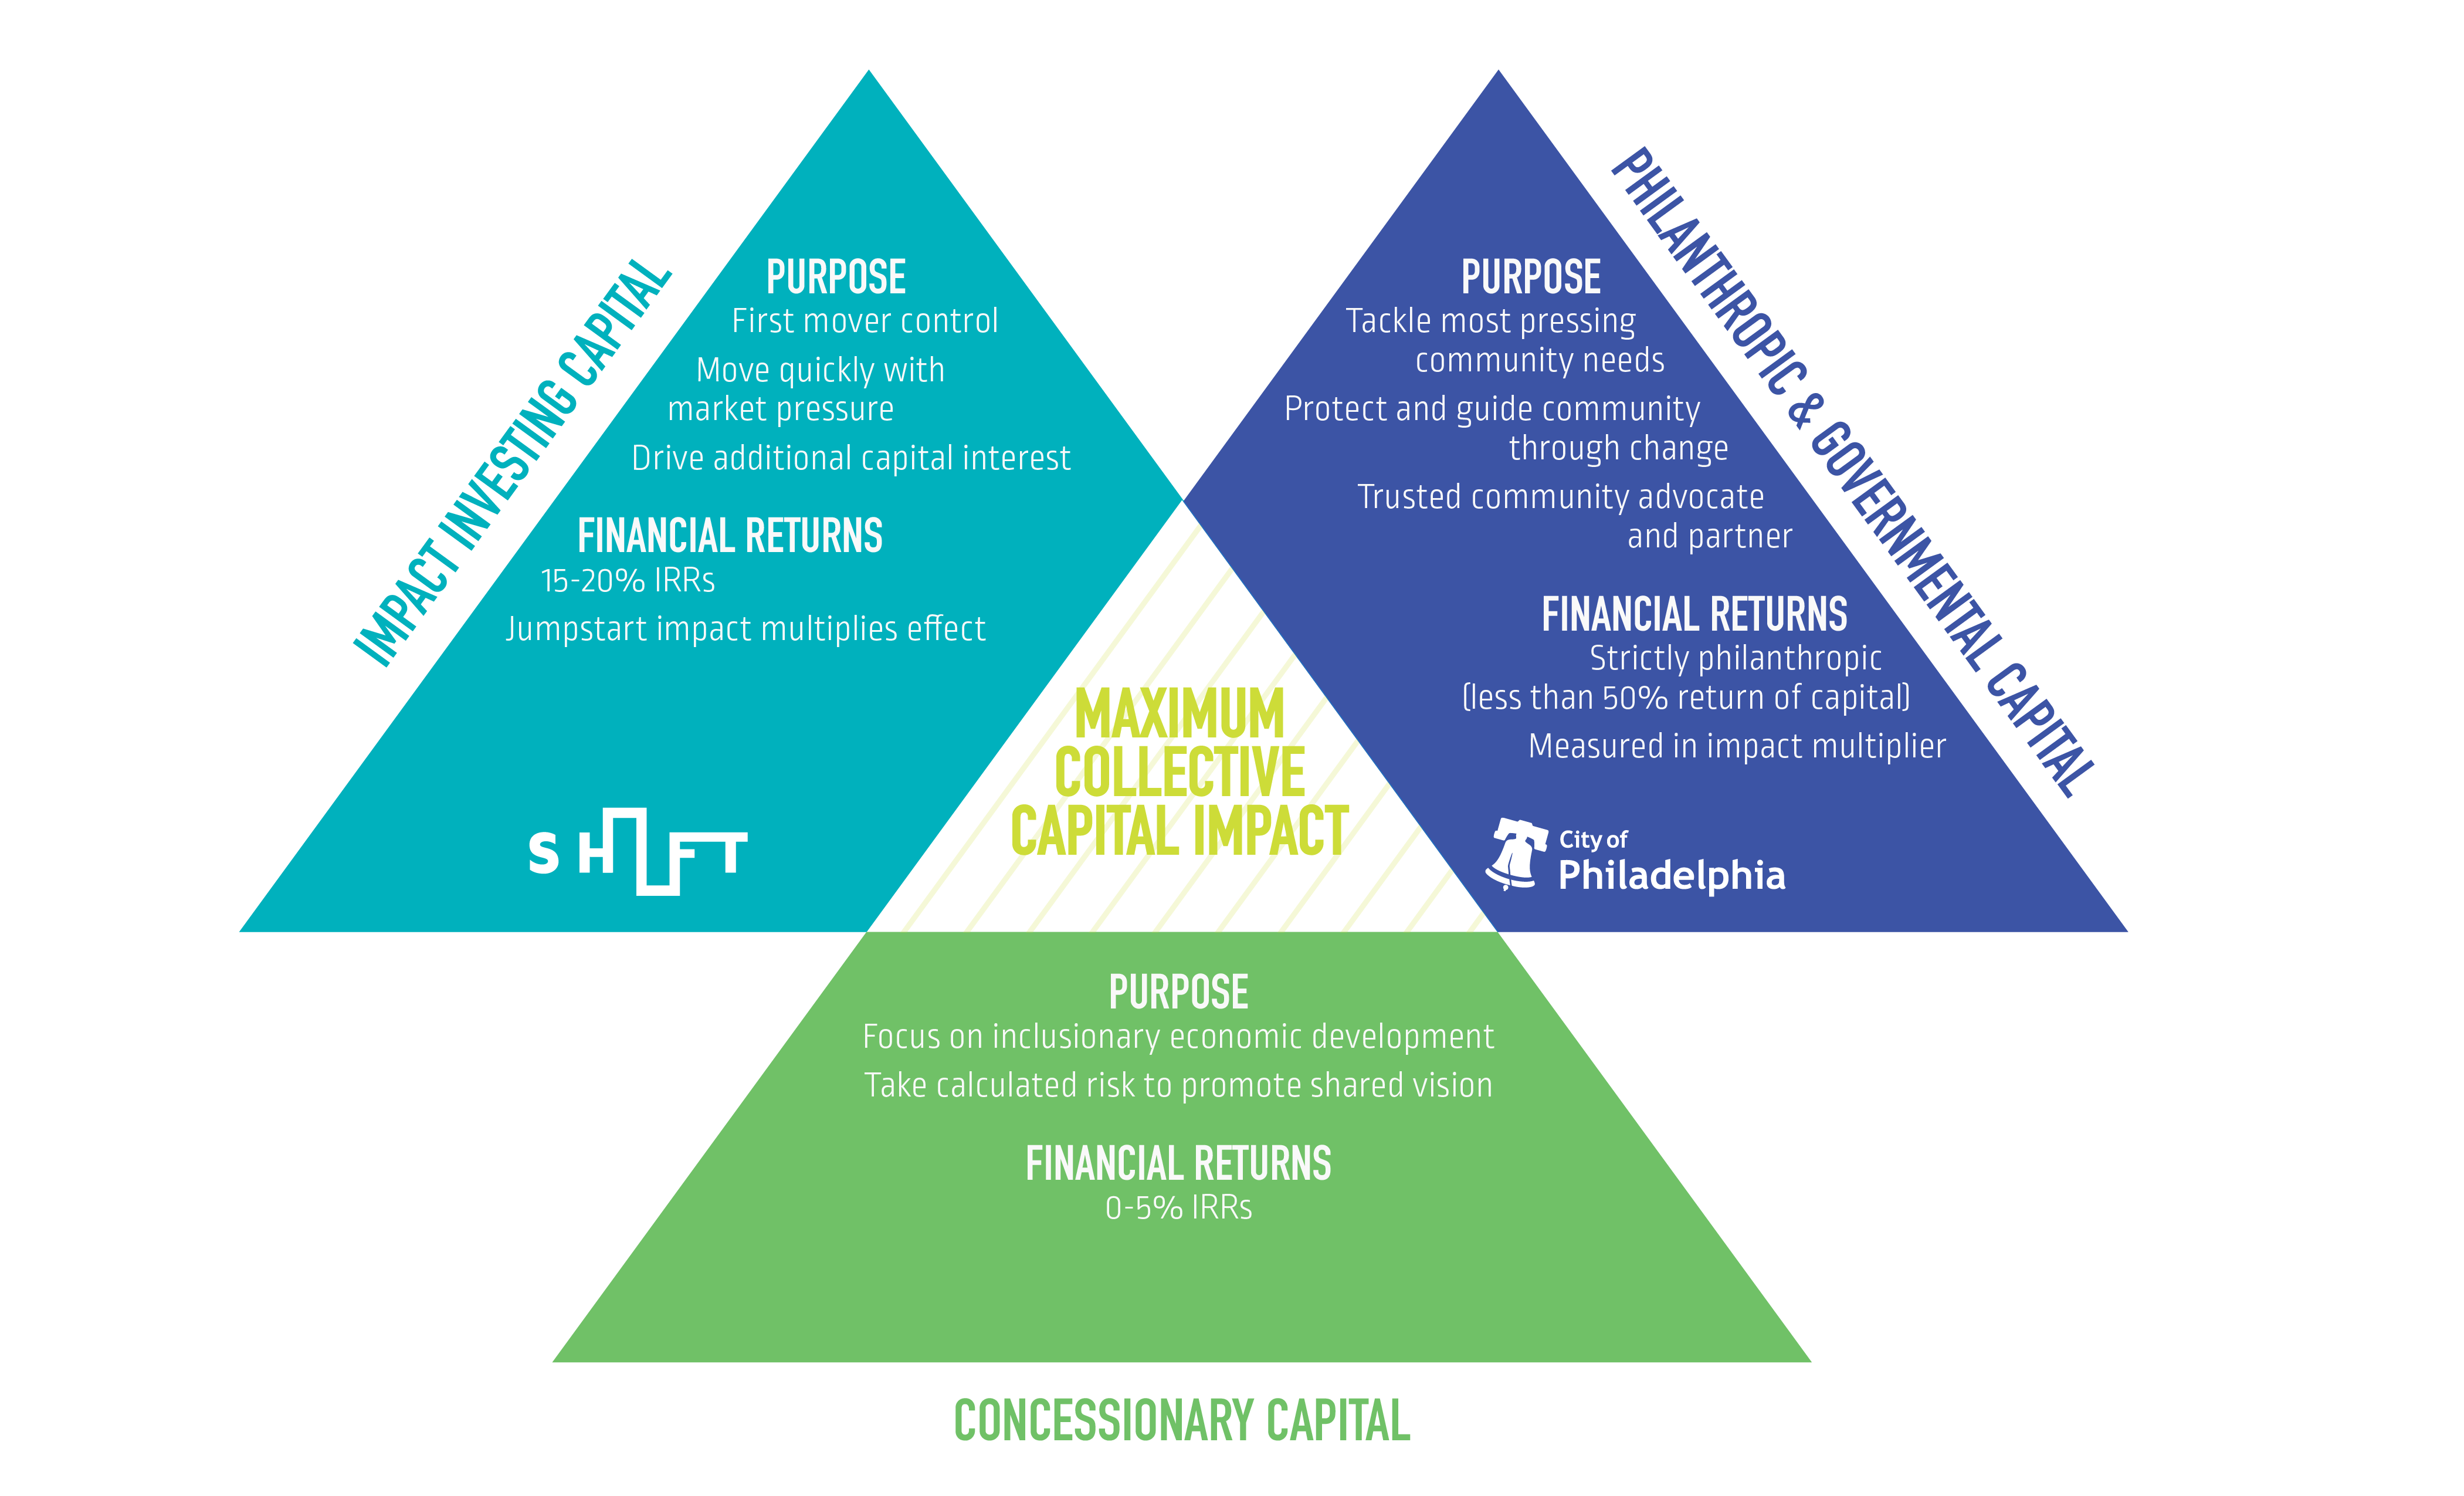 SHIFT collective capital approach